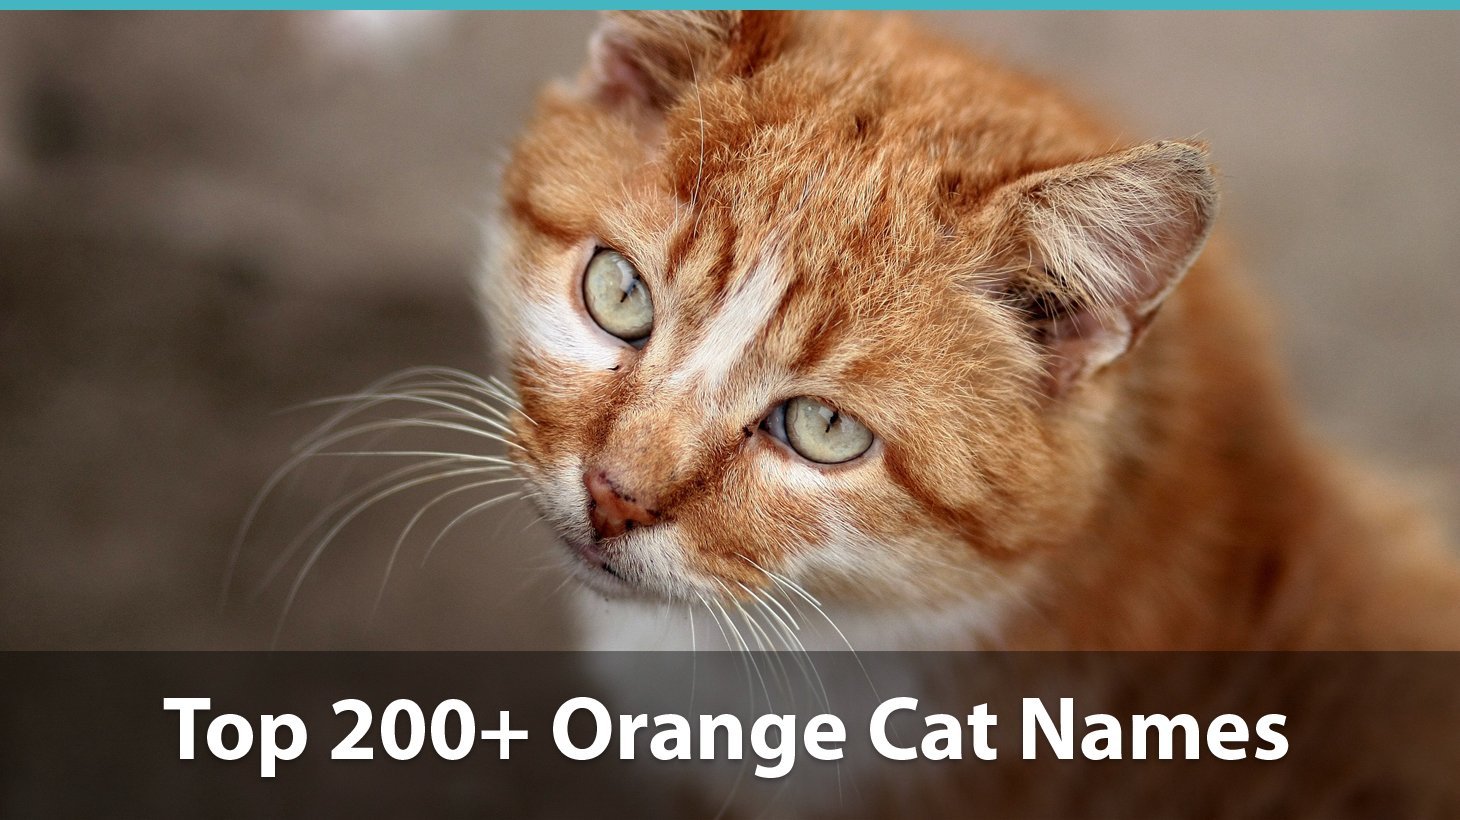 Top 200+ Names For Orange Cats: Funny, Traditional, Unique, And More!